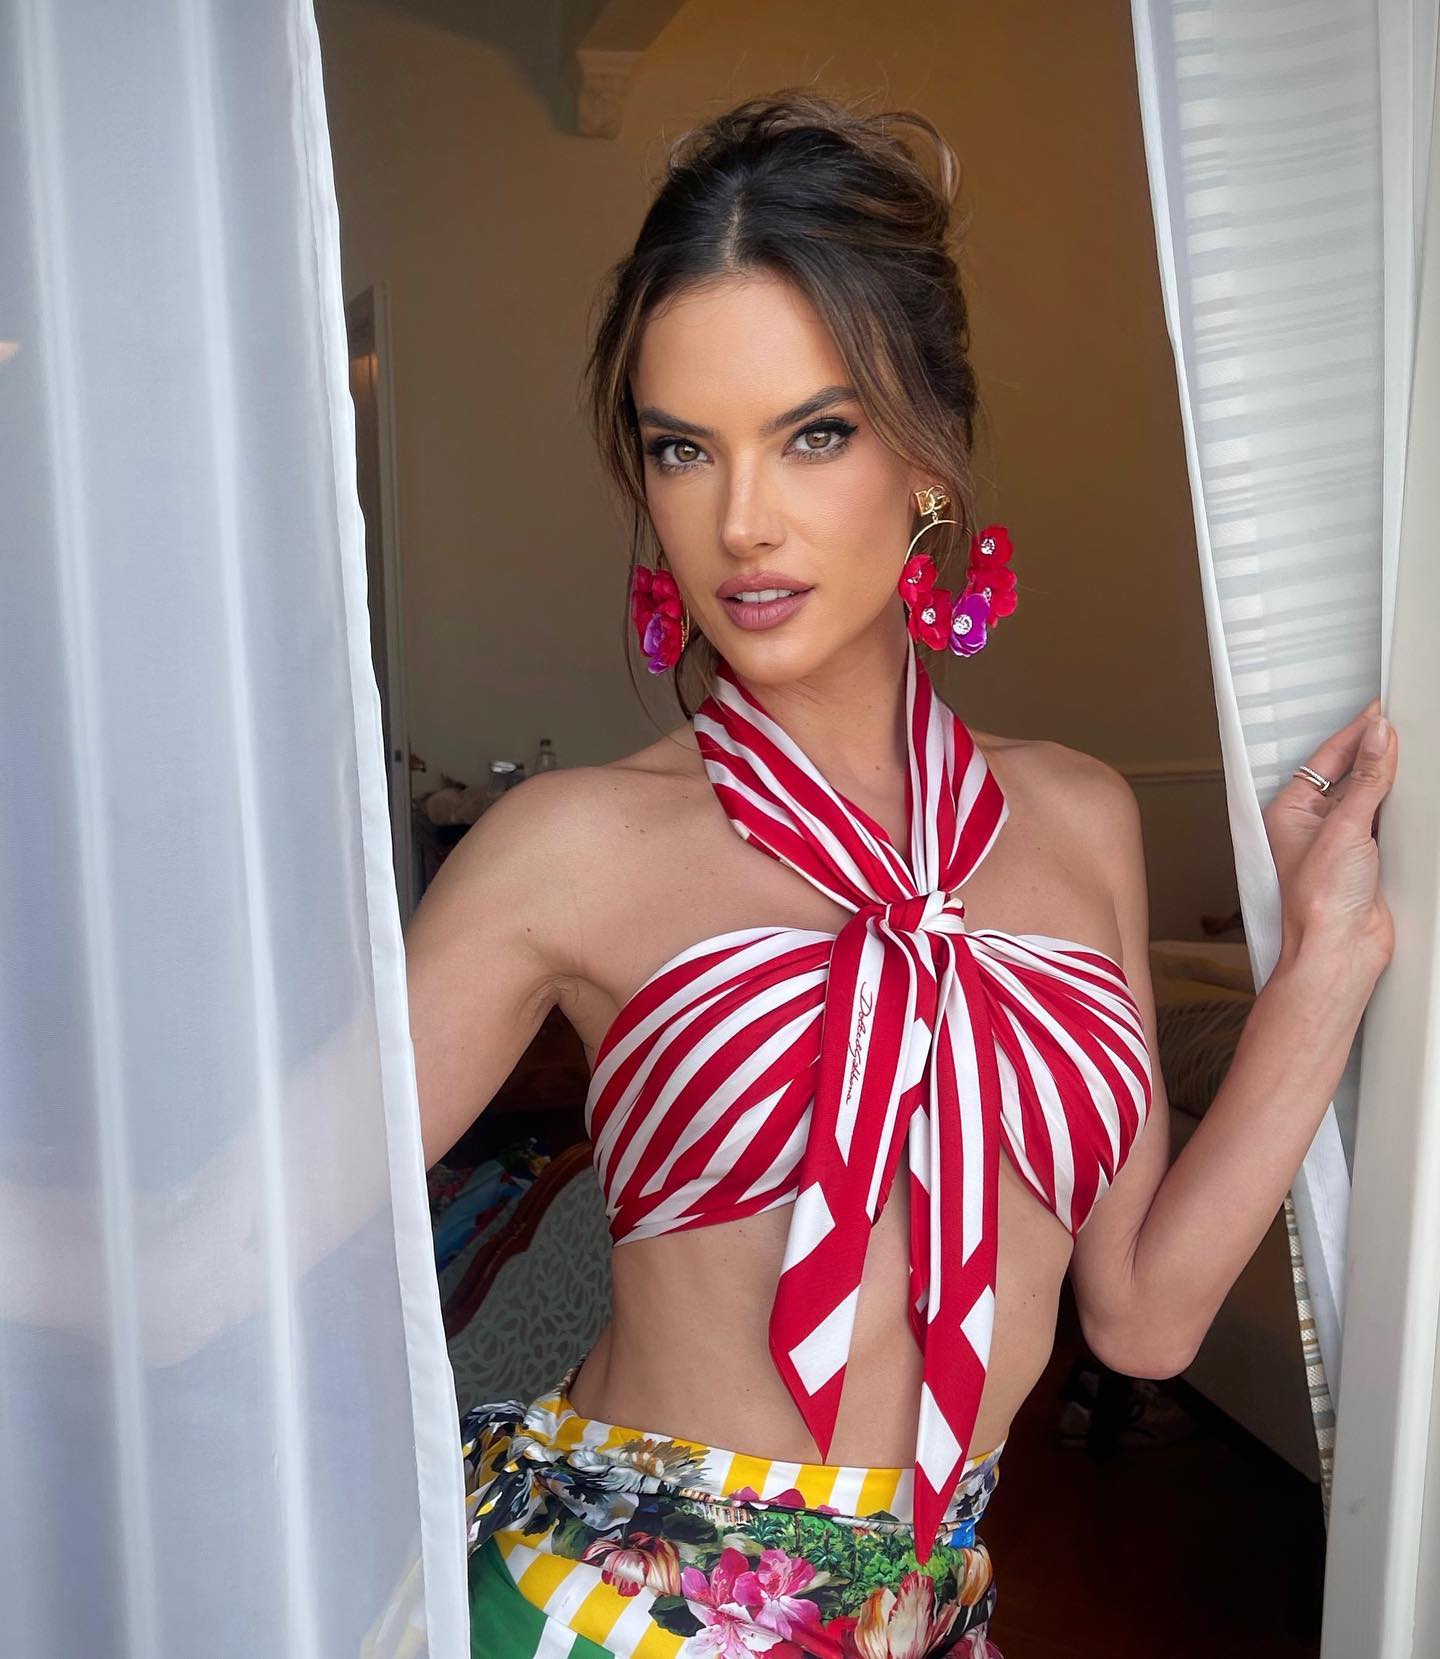 Photos n°7 : Alessandra Ambrosio is In The Fast Lane!